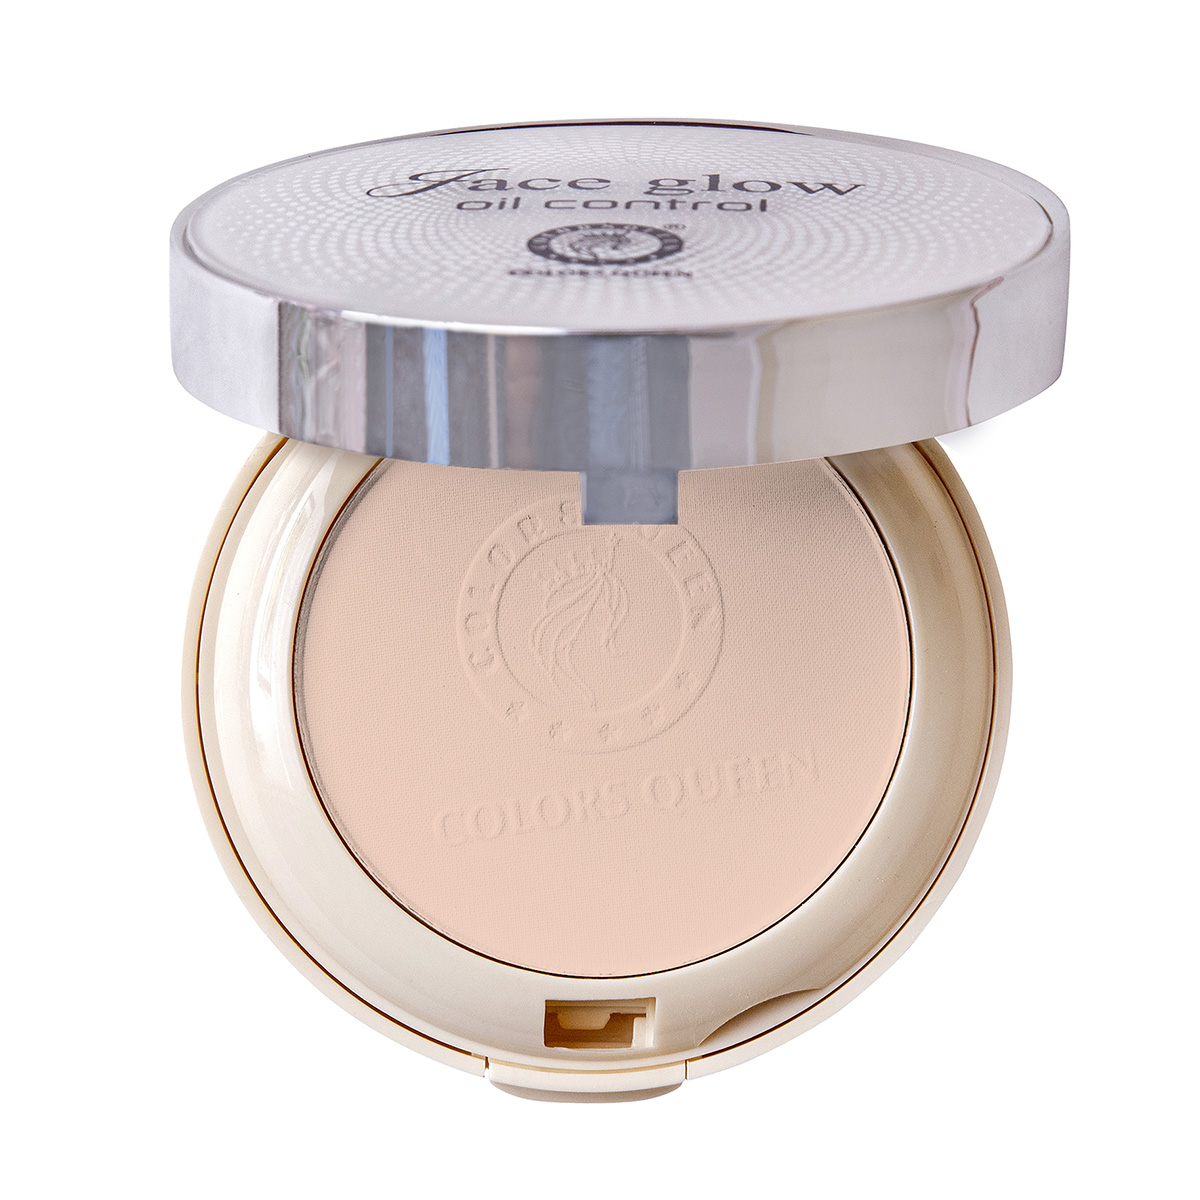 Colors Queen Face Glow Compact Powder For Women - 02, 20gm